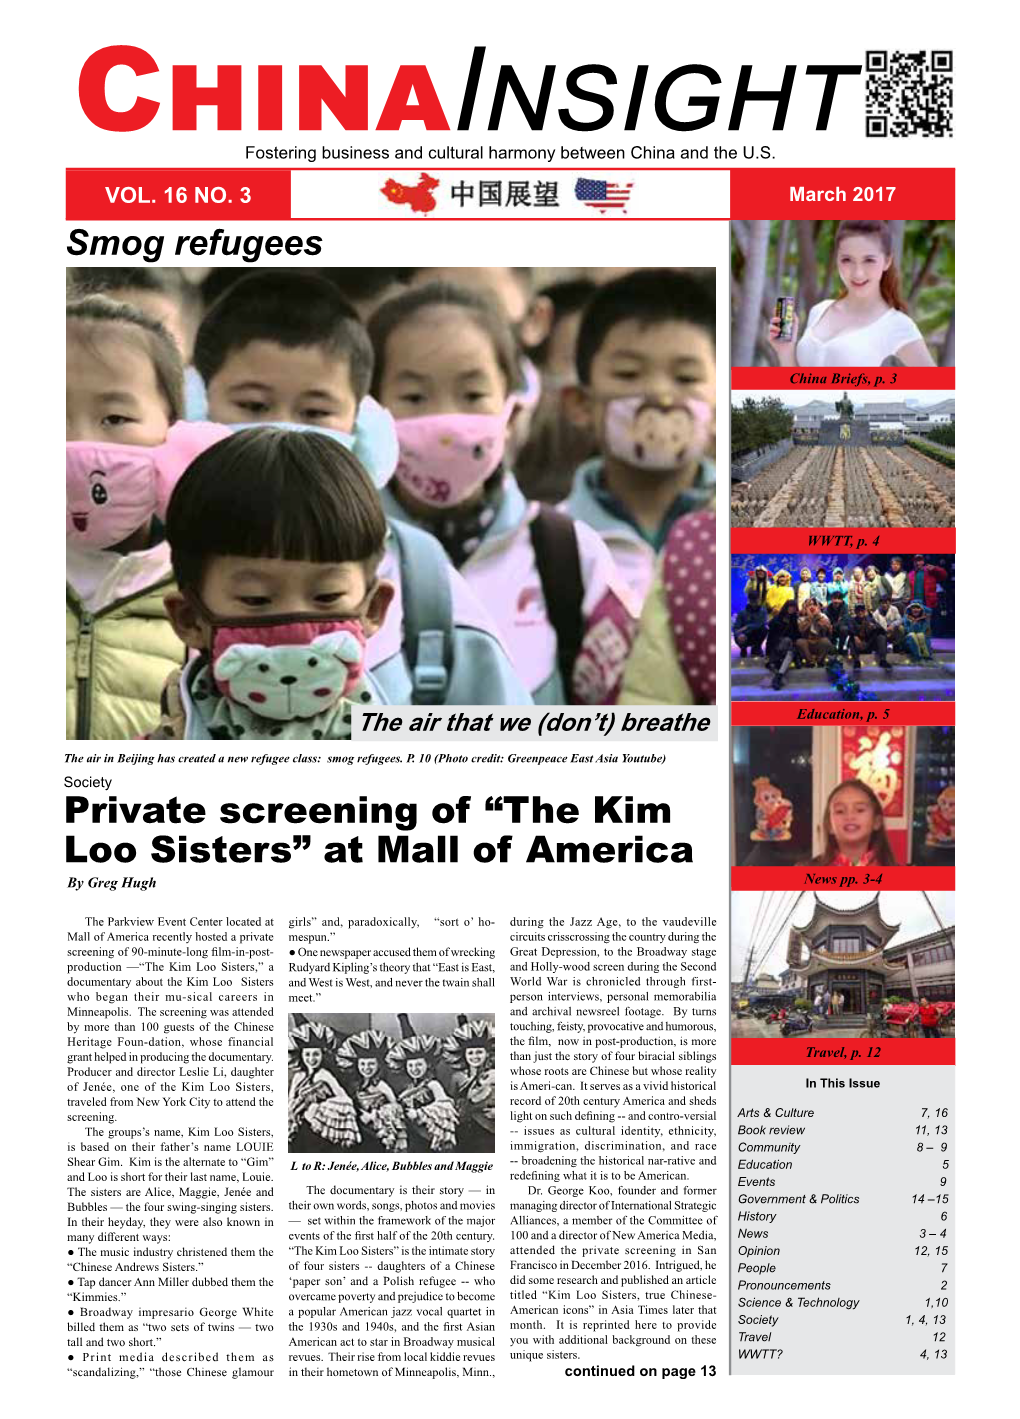 Private Screening of “The Kim Loo Sisters” at Mall of America by Greg Hugh News Pp